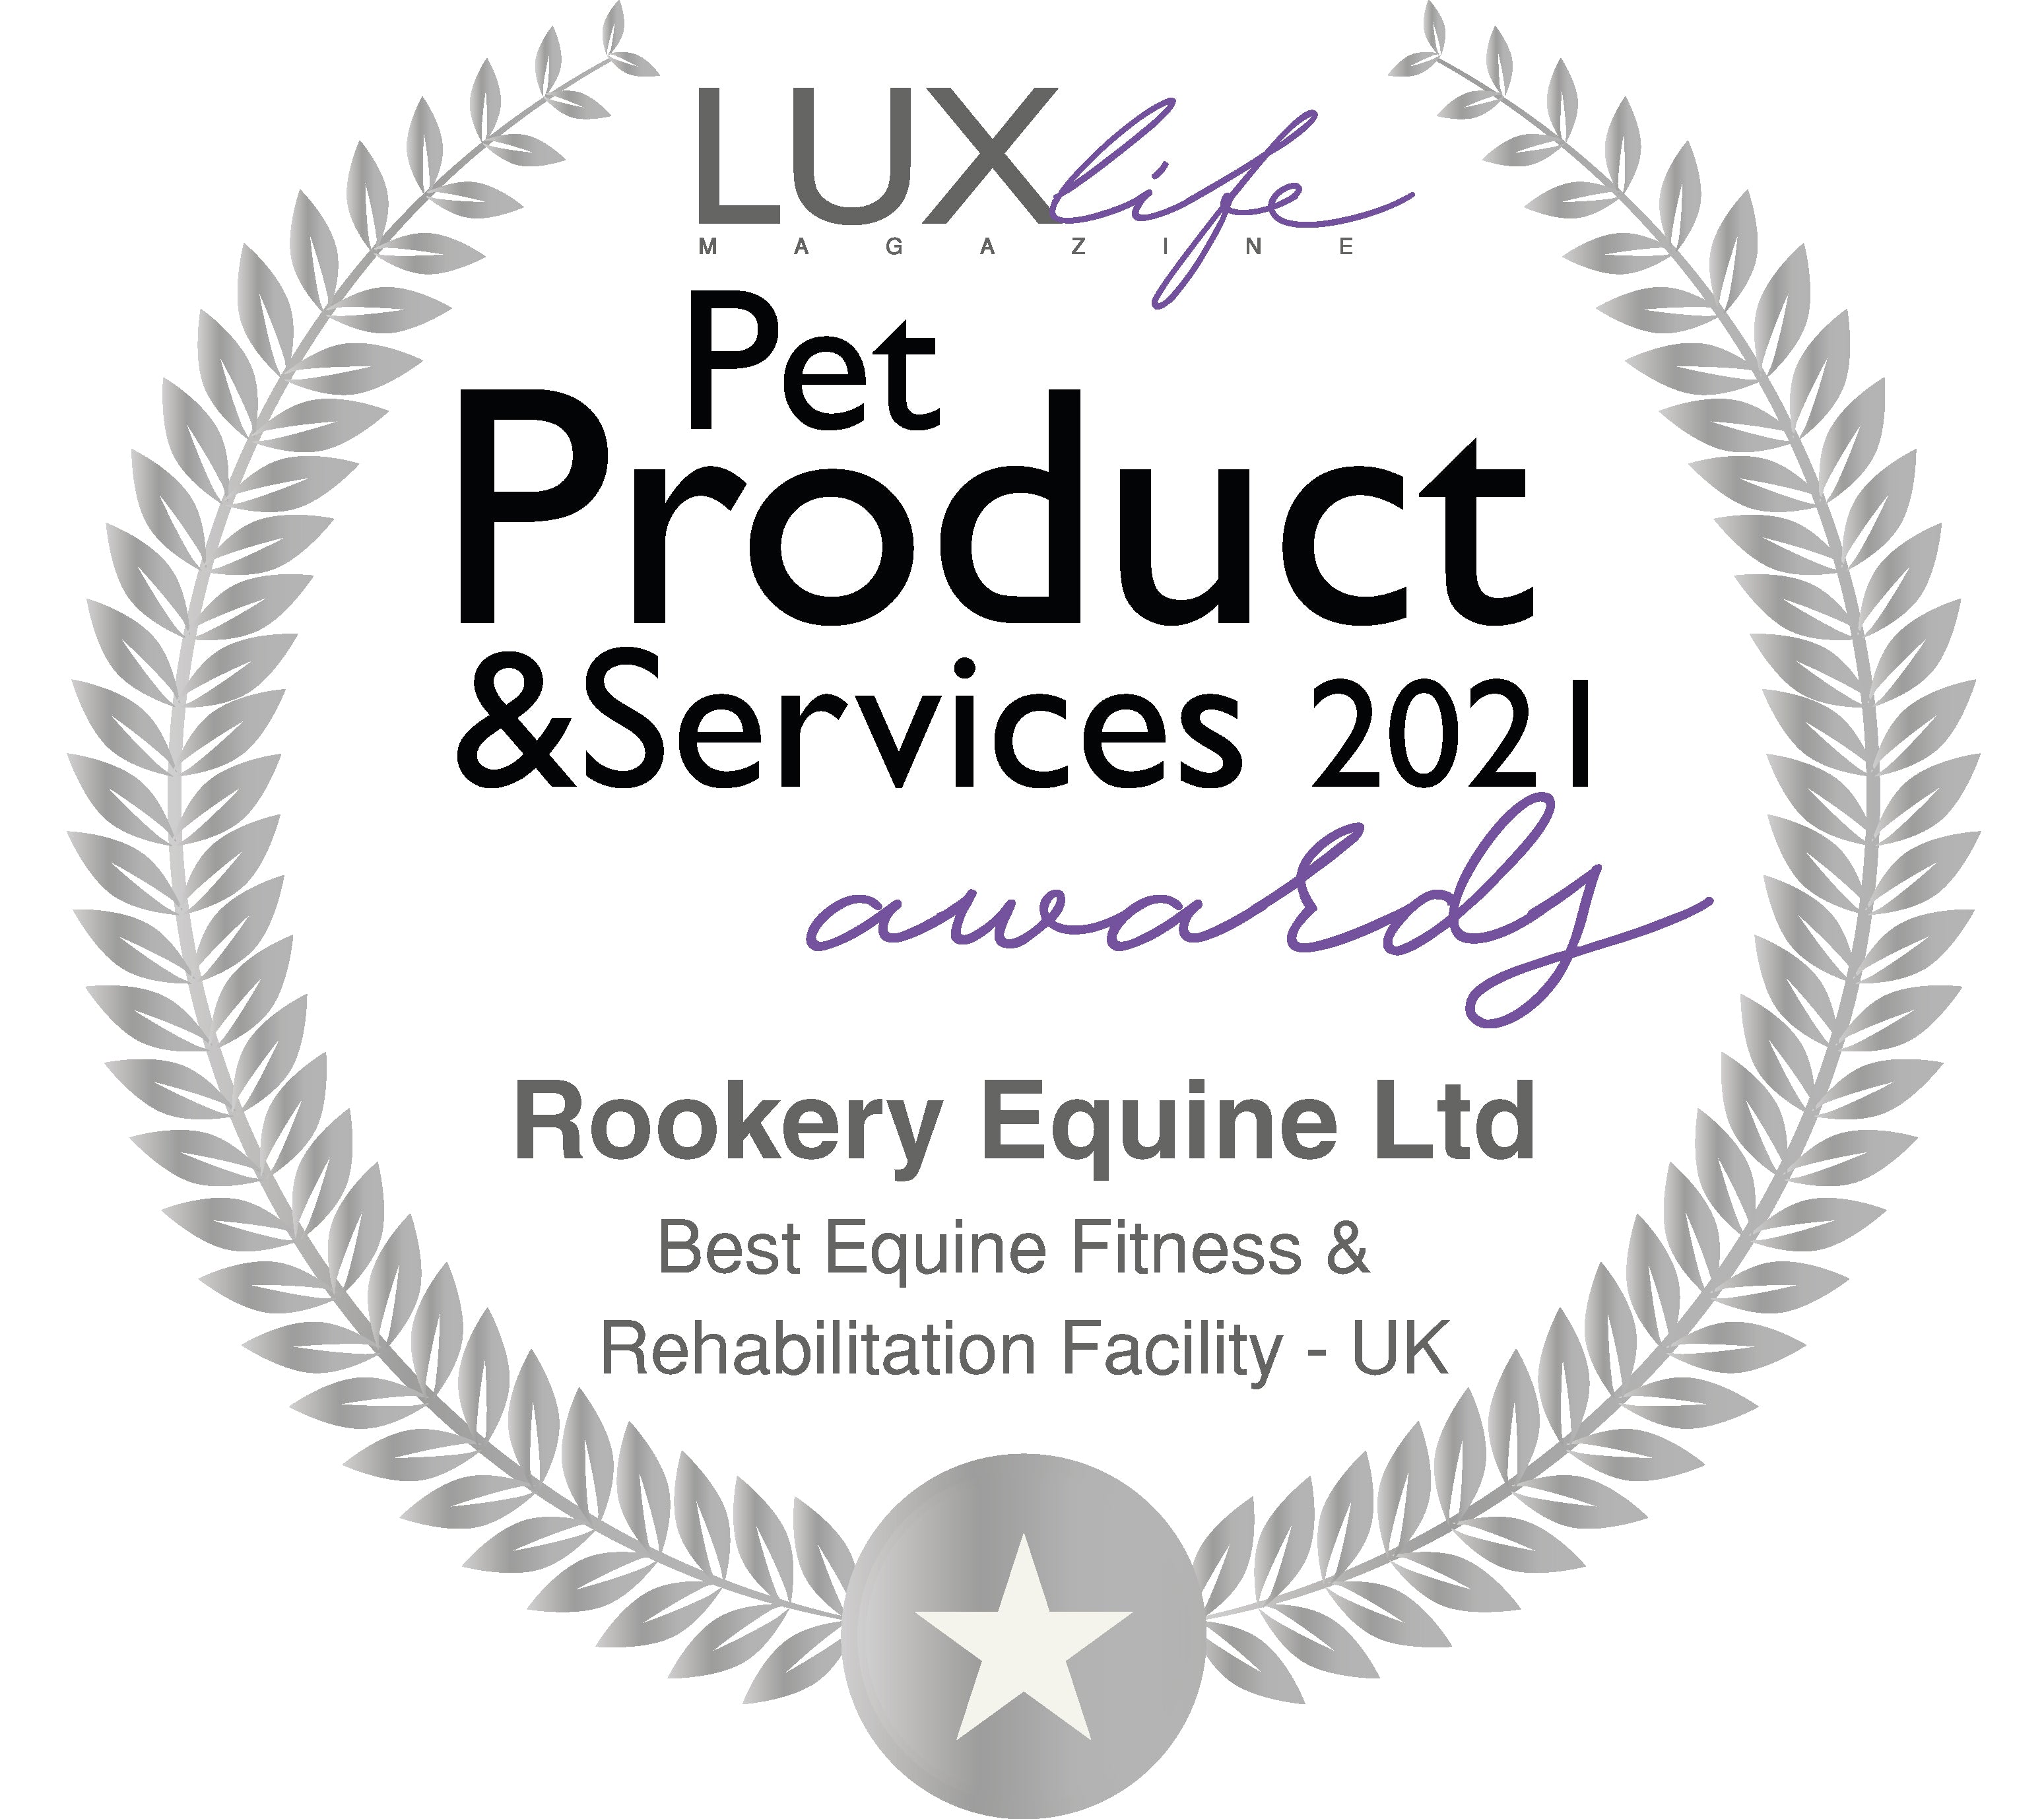 Launched in 2018, the Pet Products and Services Awards seek to spotlight individuals, organisations and enterprises who strive to make an outstanding contribution to the pet industry, representing the most dedicated of our pets’ caretakers and providers.